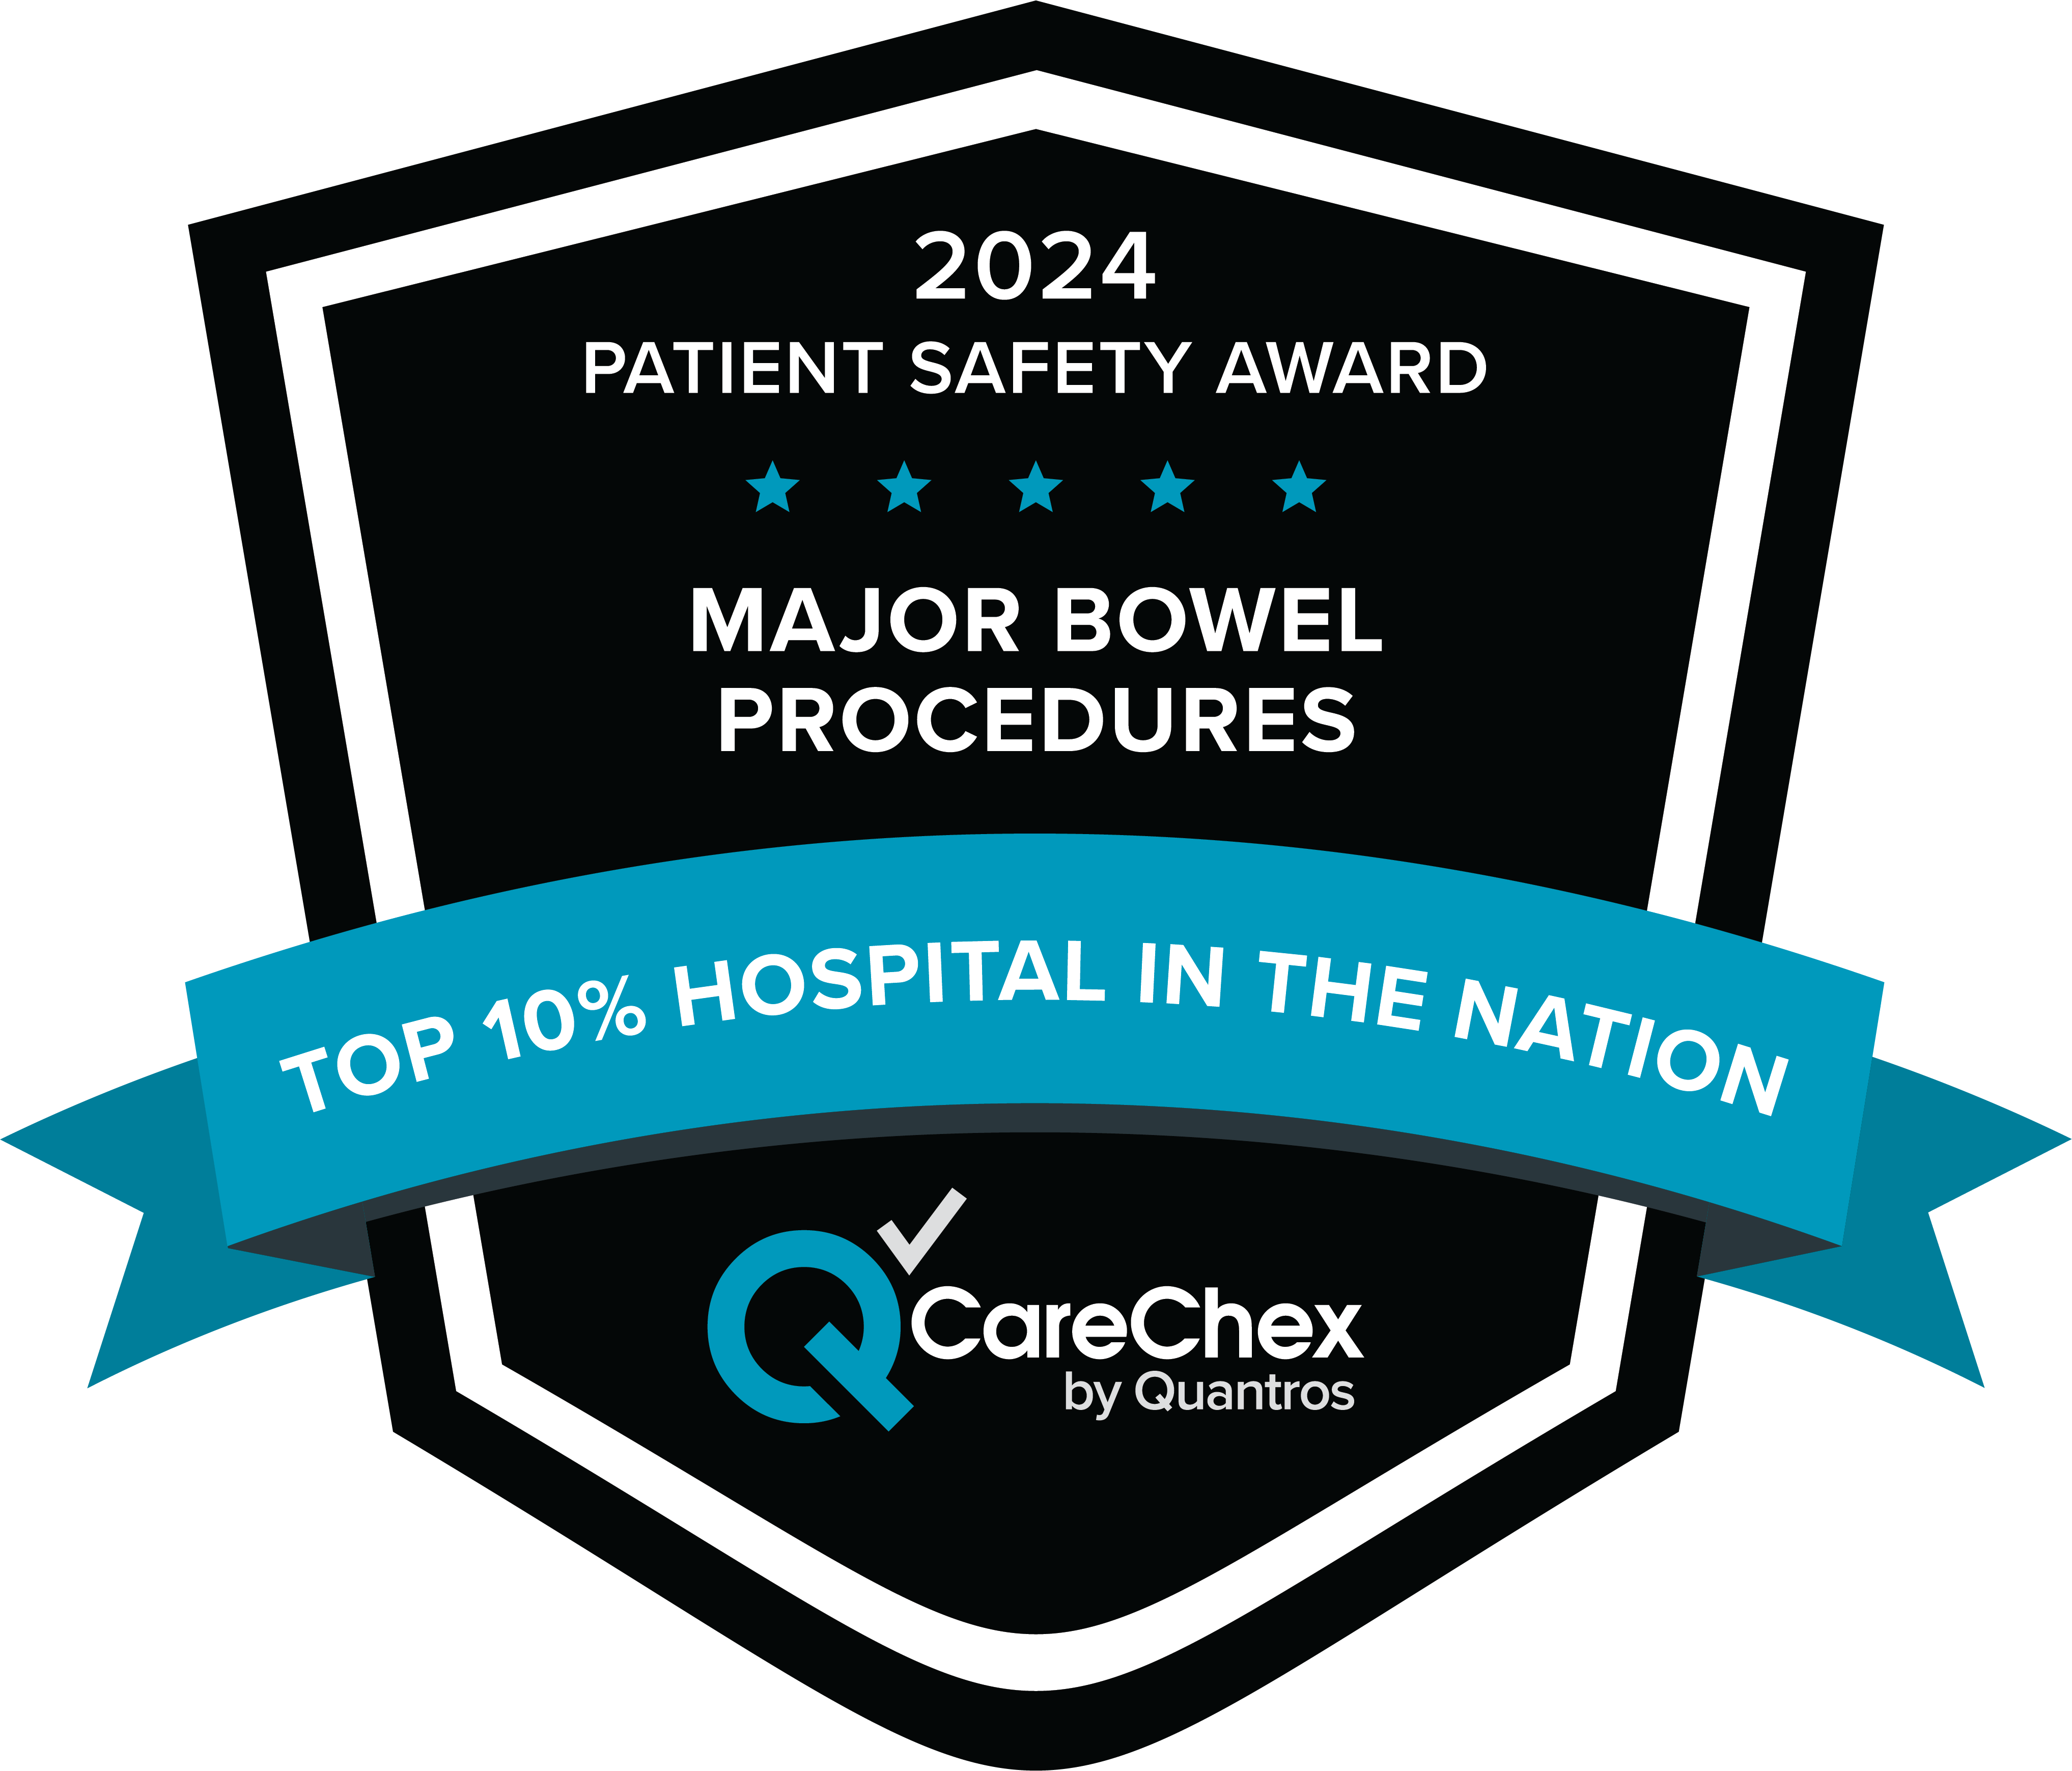 Awards badge for Top 10% Hospital in the Nation for Patient Safety in Major Bowel Procedures – 2024 CareChex by Quantros